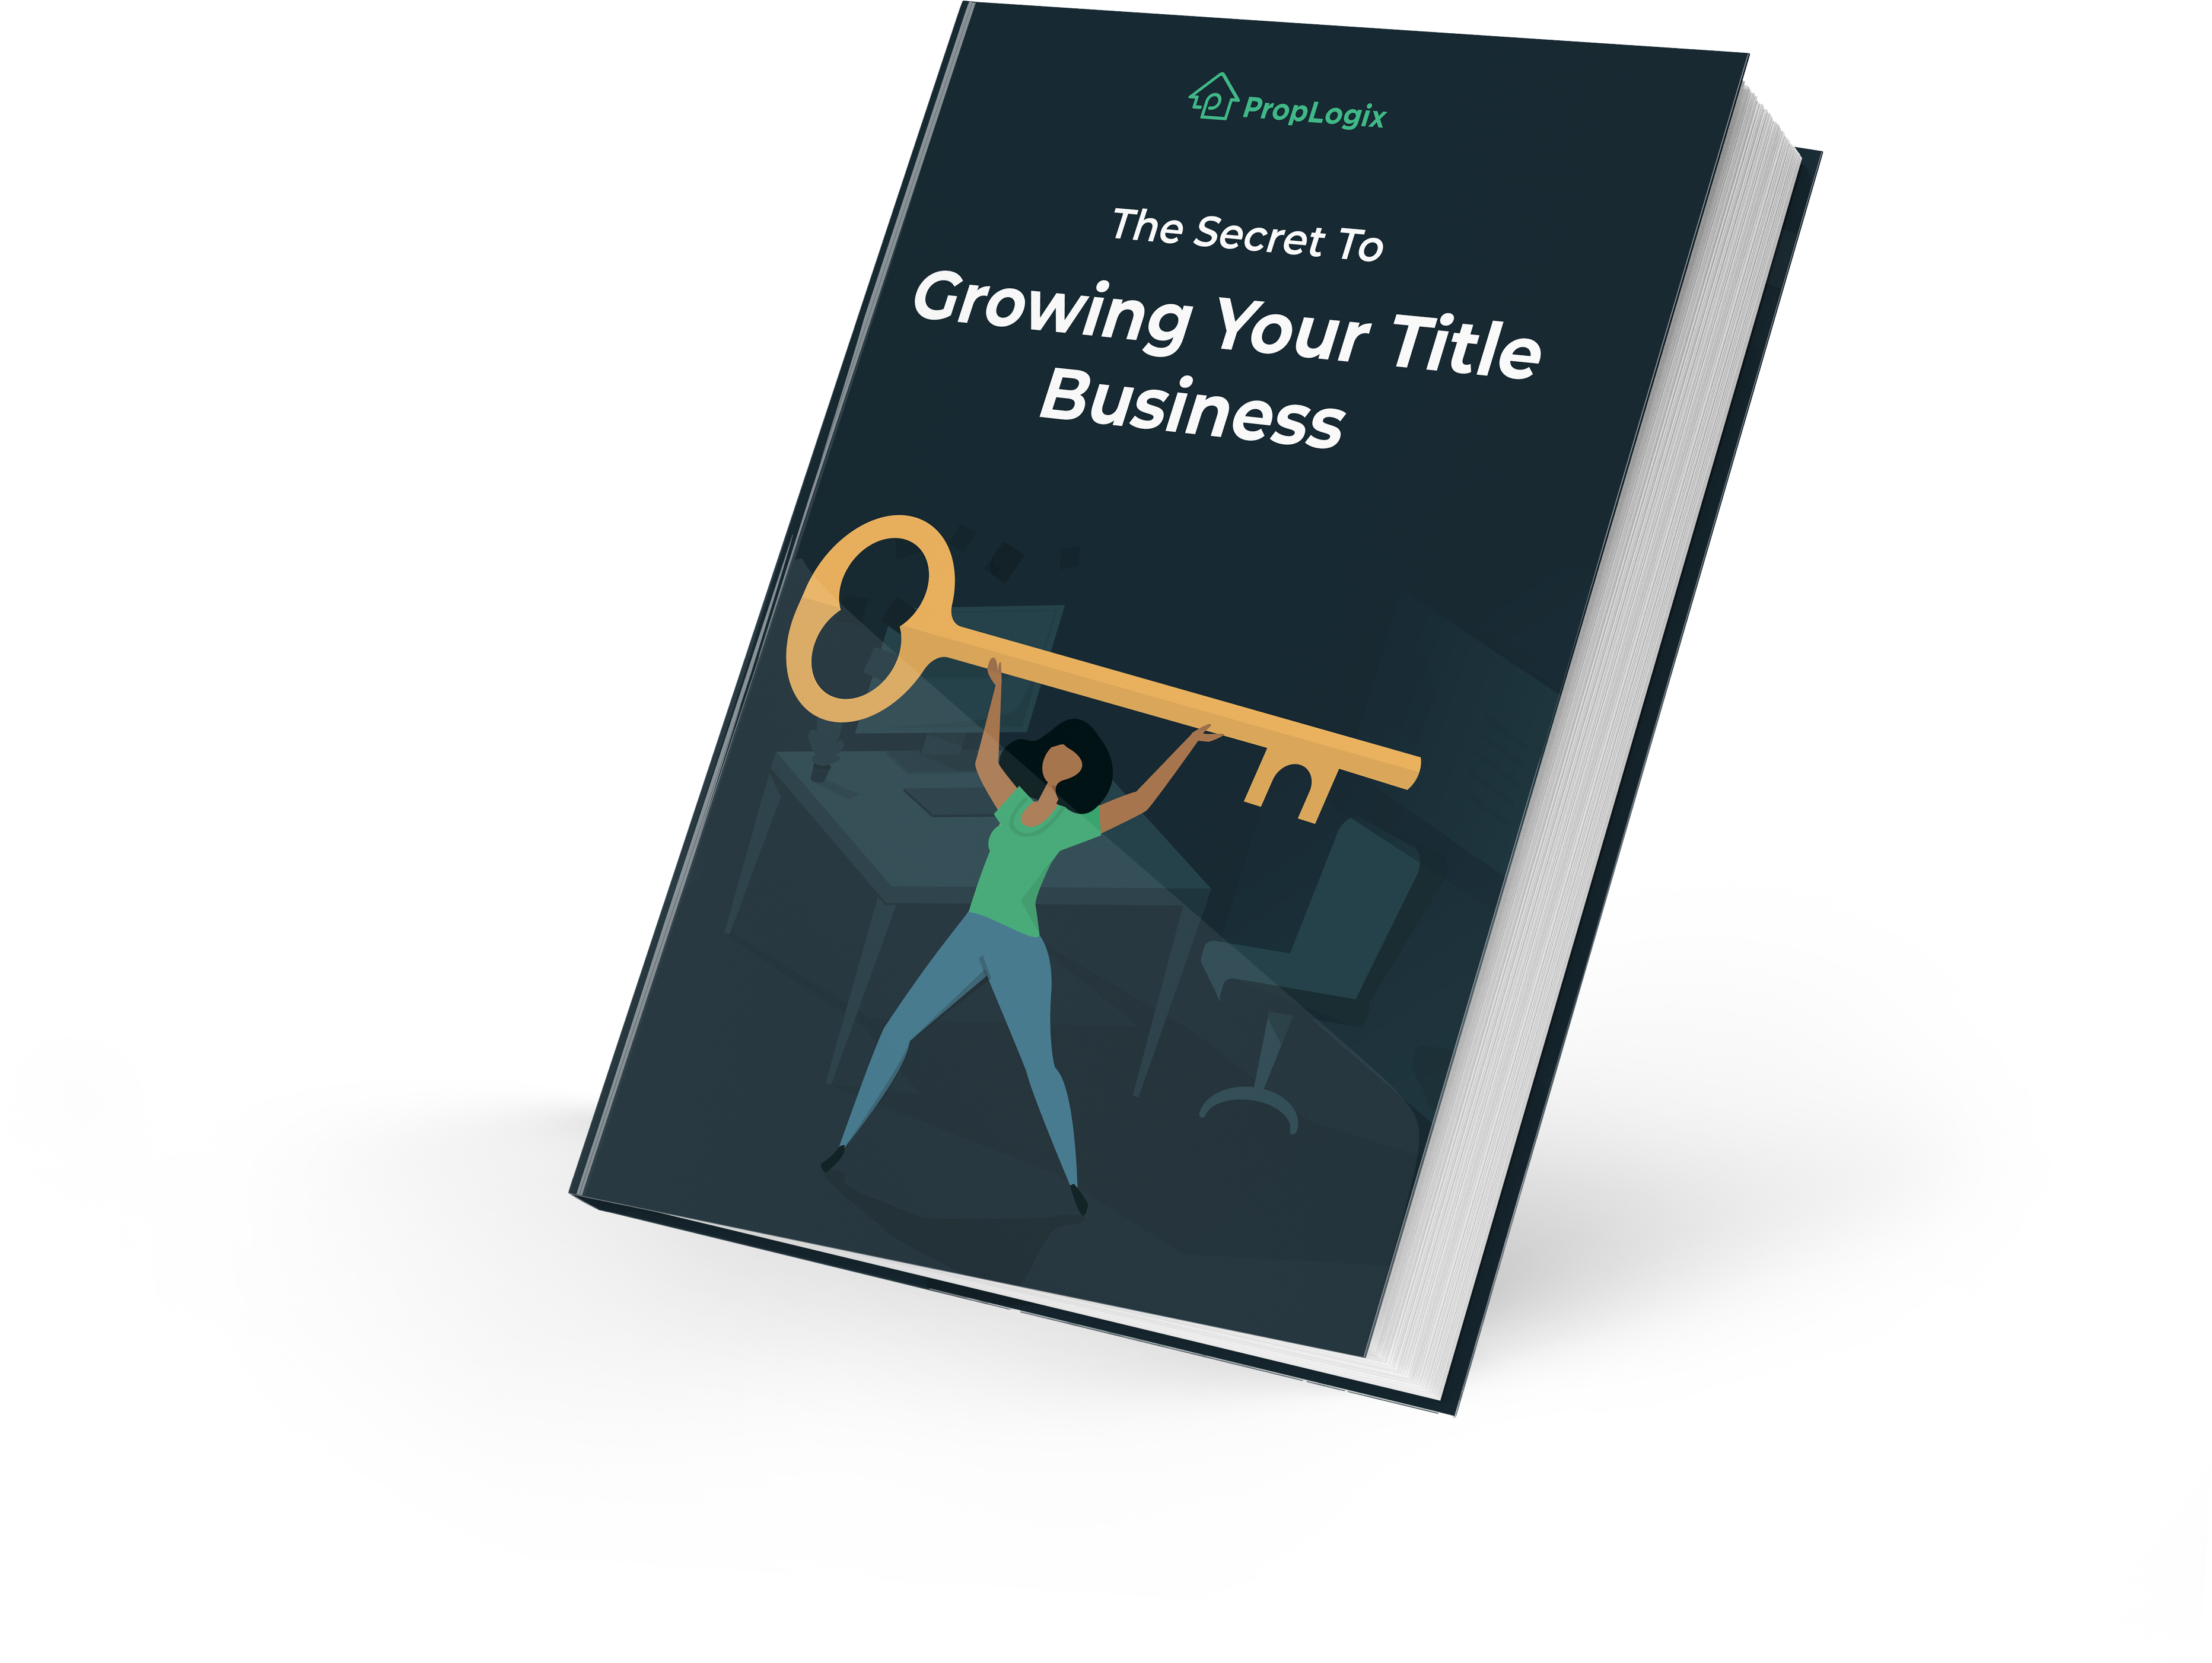 TheSecretToGrowingYourTitleBusiness-BookcCover